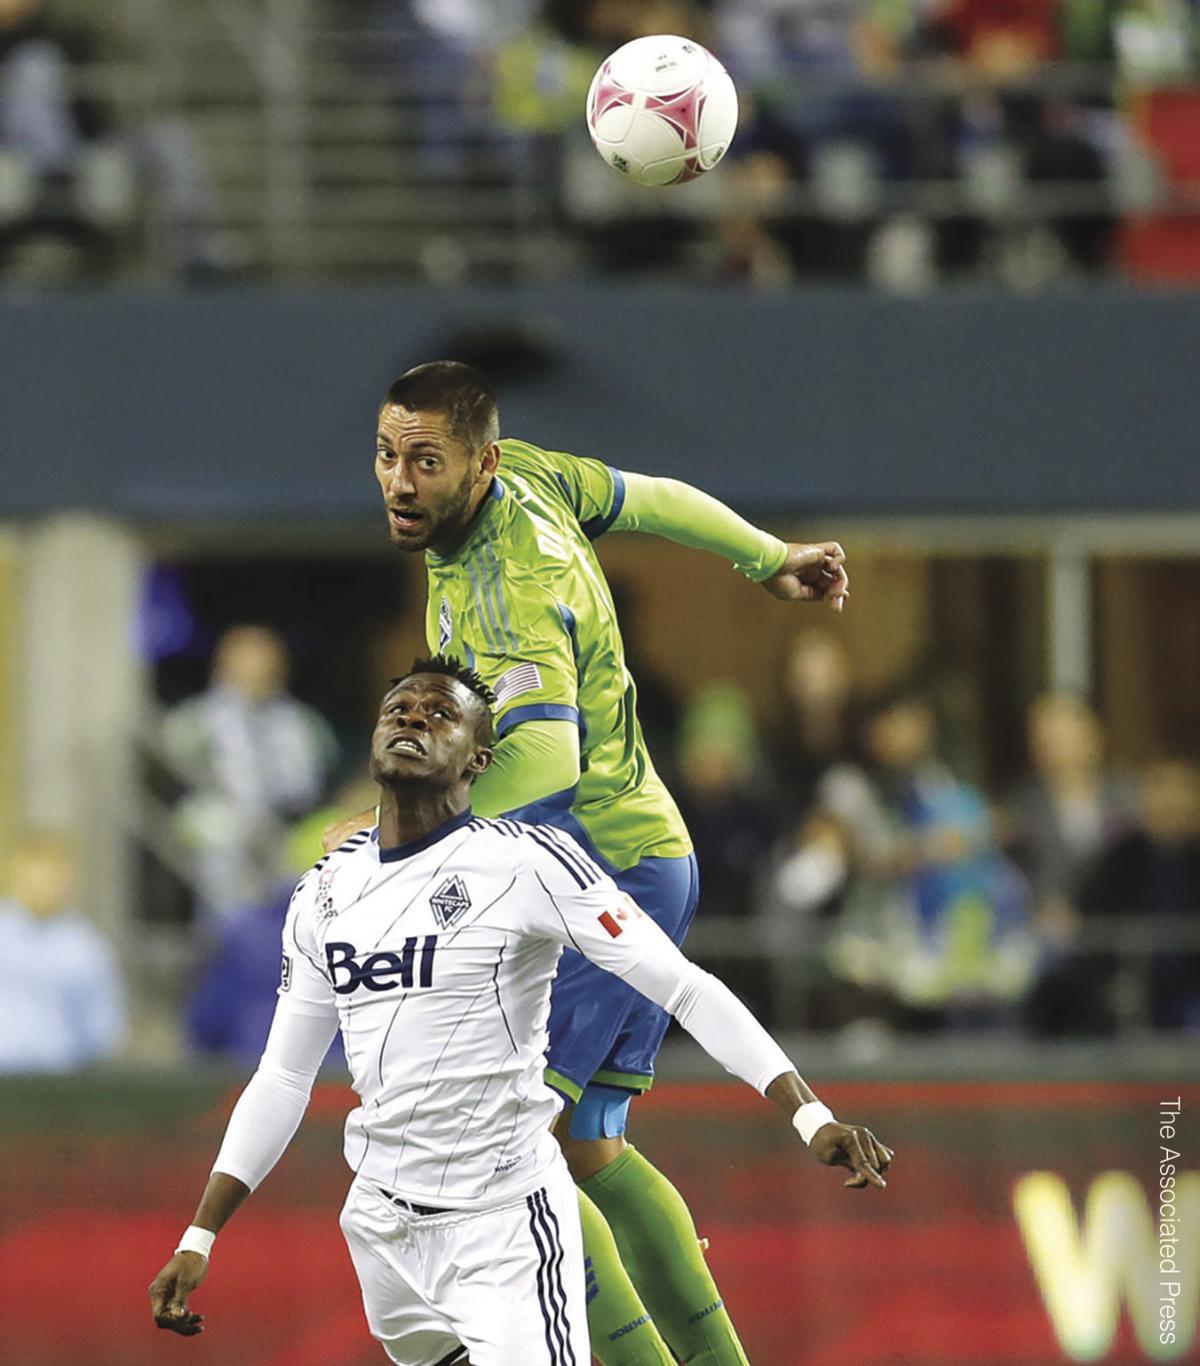 Clint Dempsey, the 'kid from Nacogdoches,' lifts U.S. soccer team